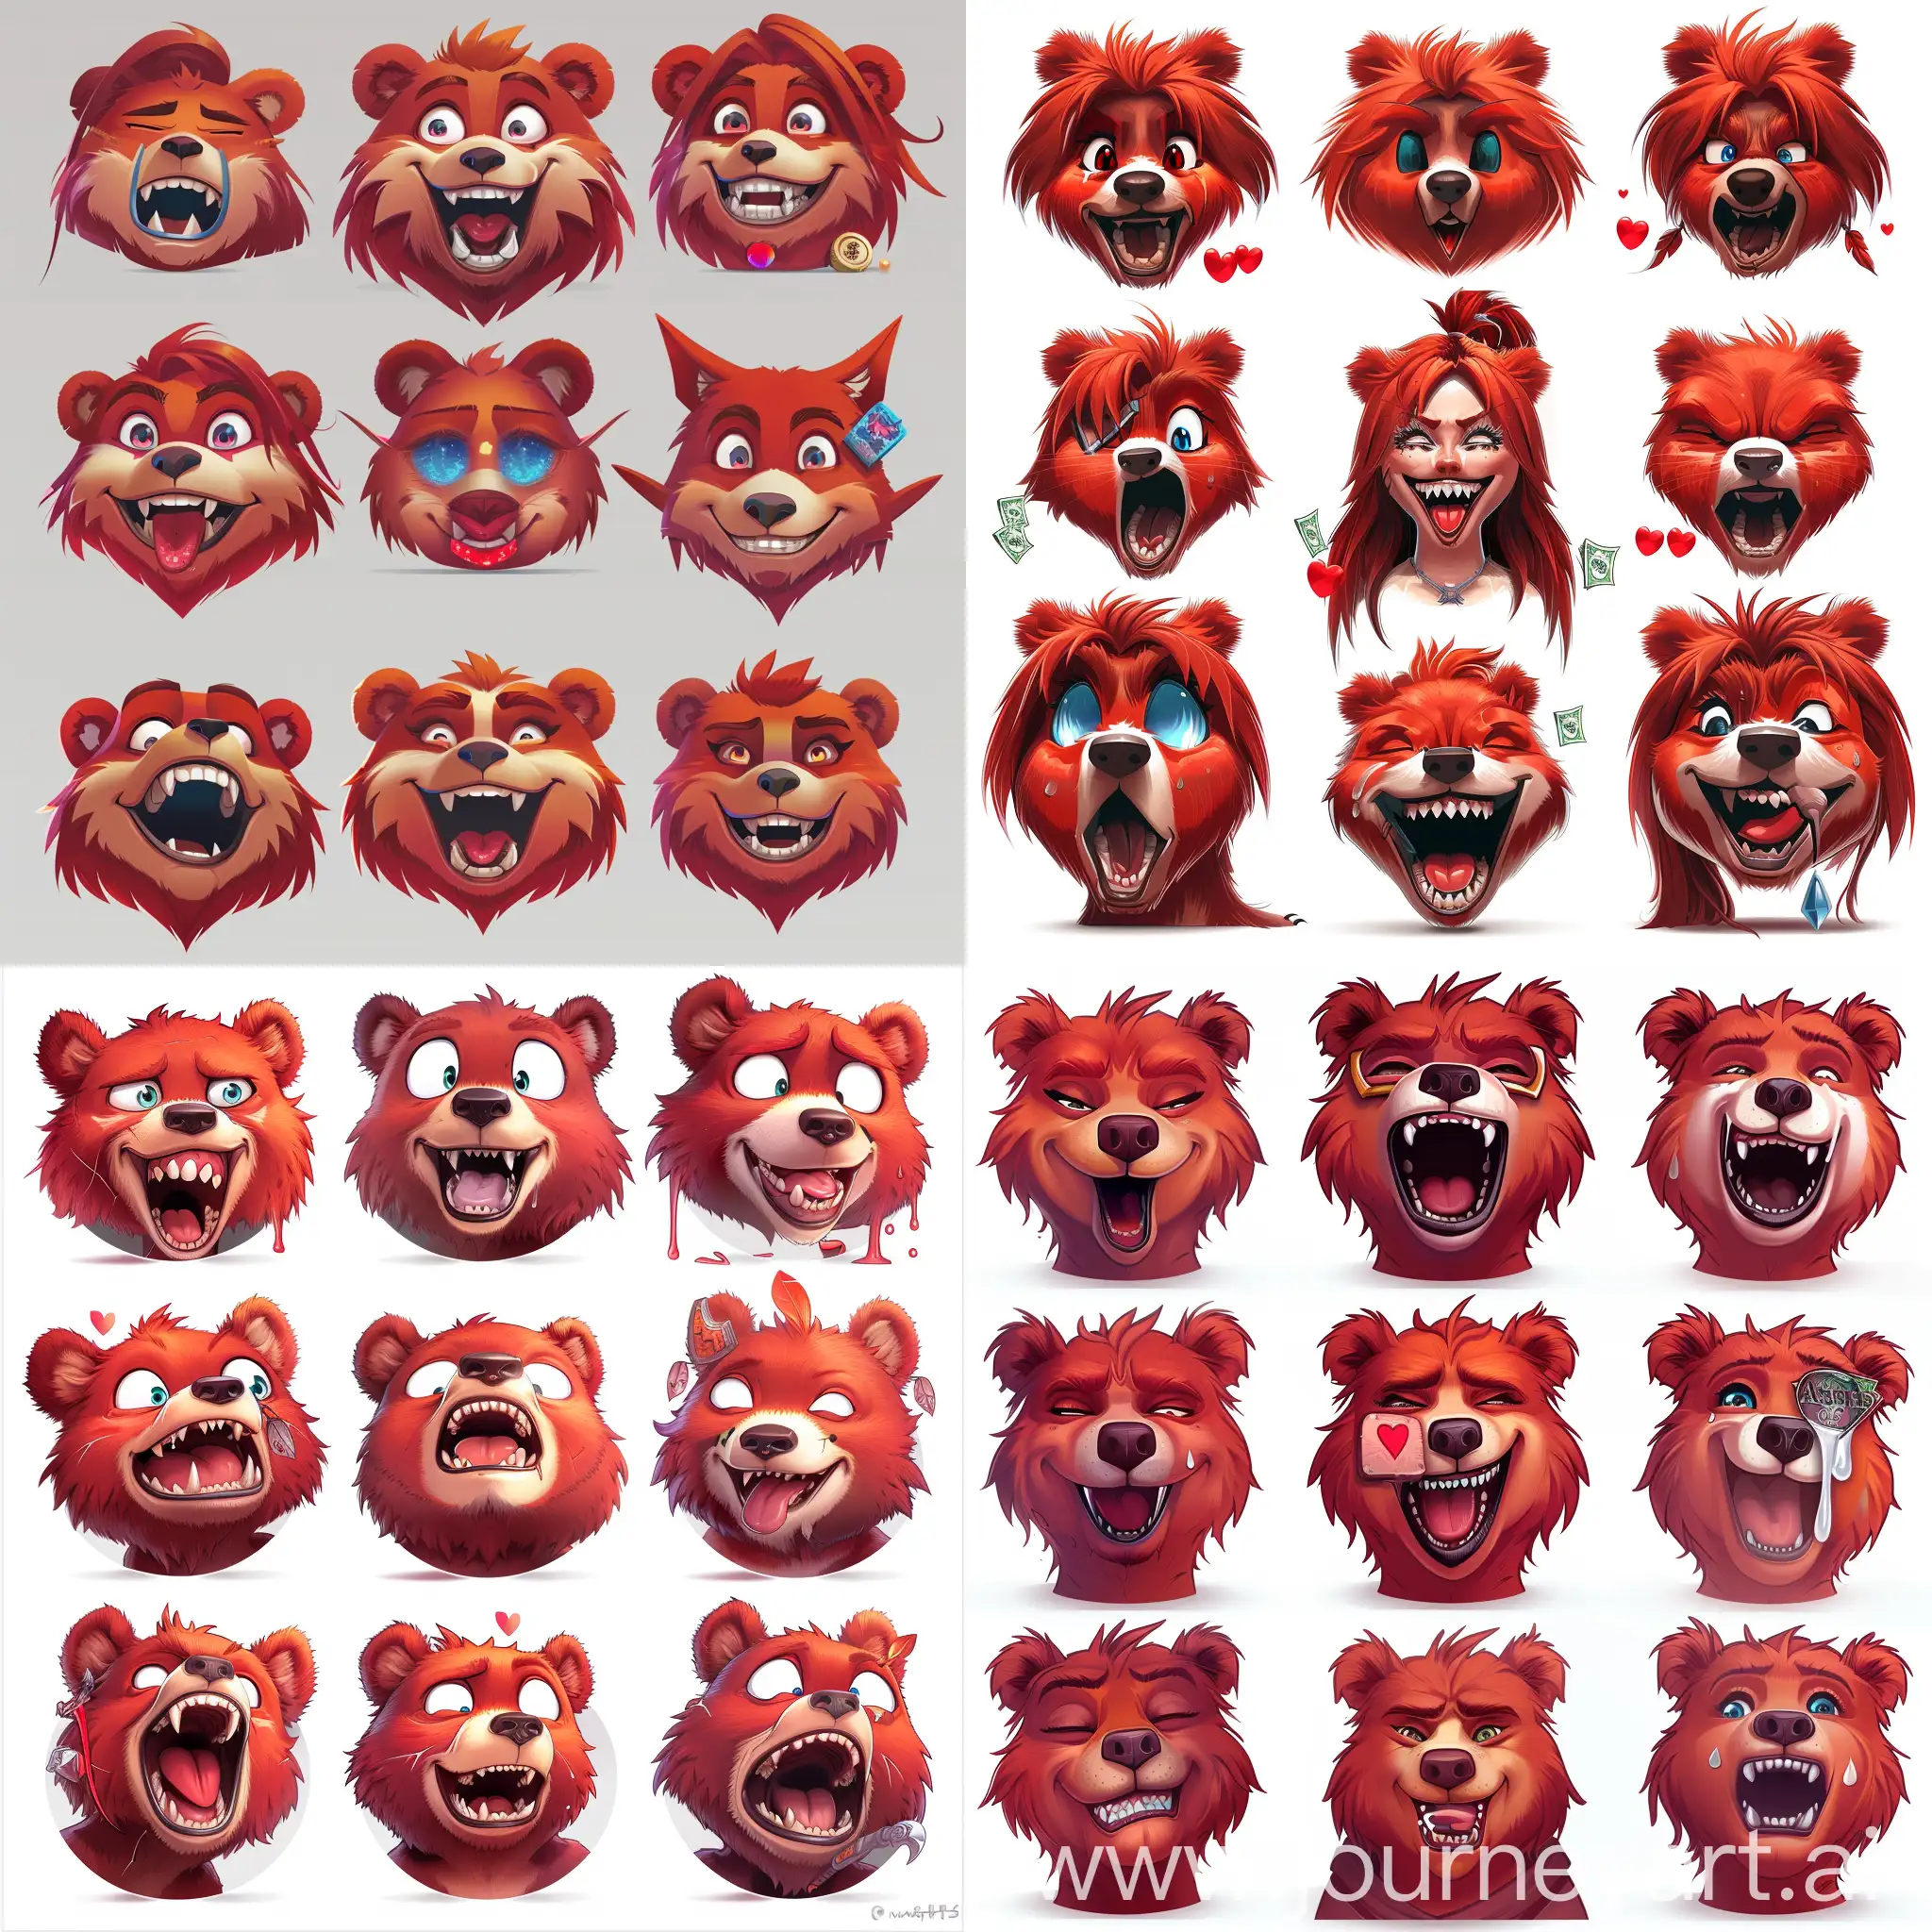 world of warcraft druid female bear, red fur, twitch emoji set (laughing, smiling, smiling widely, crying, yelling, angry, in love, shy, money, depressed)